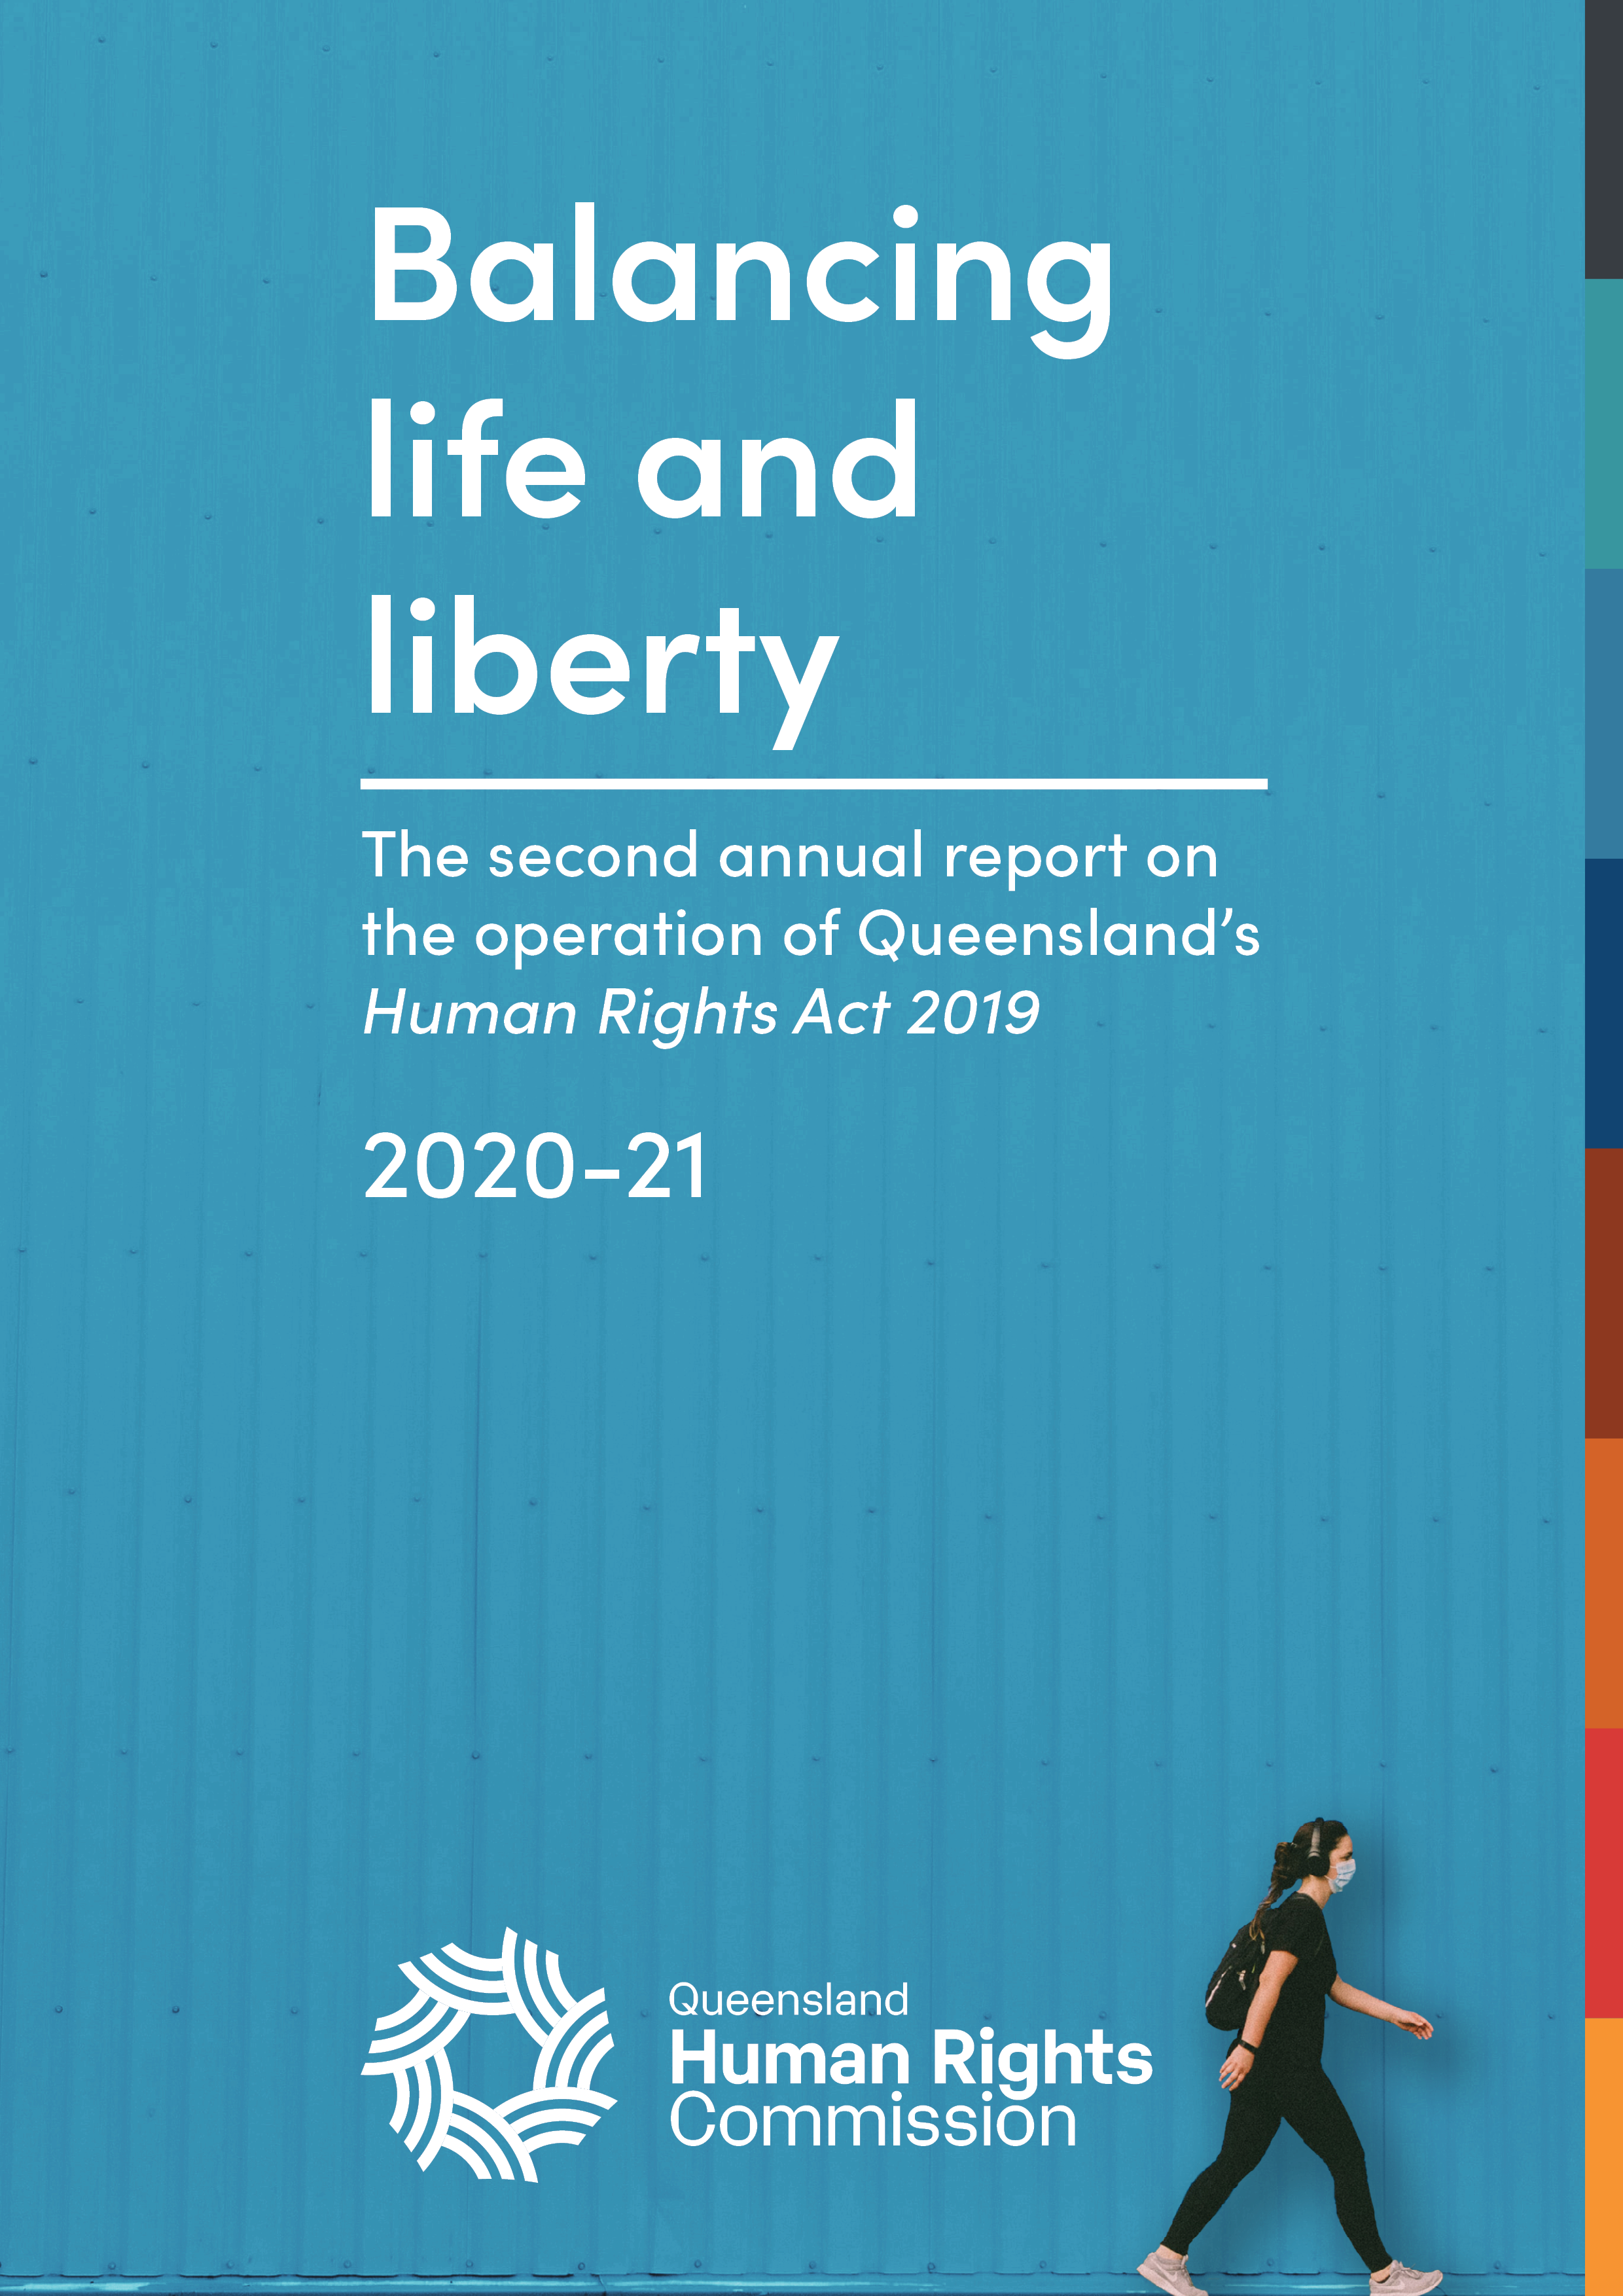 Front cover. Colour photo of someone walking - they are wearing all black and have a long dark braid, headphones and a backpack on, and are wearing a face mask. There's a bright blue wall behind them. White text reads "Balancing life and liberty: the second annual report on the operation of Queensland's Human Rights Act 2019; 2020-21". The QHRC logo is at the bottom. 